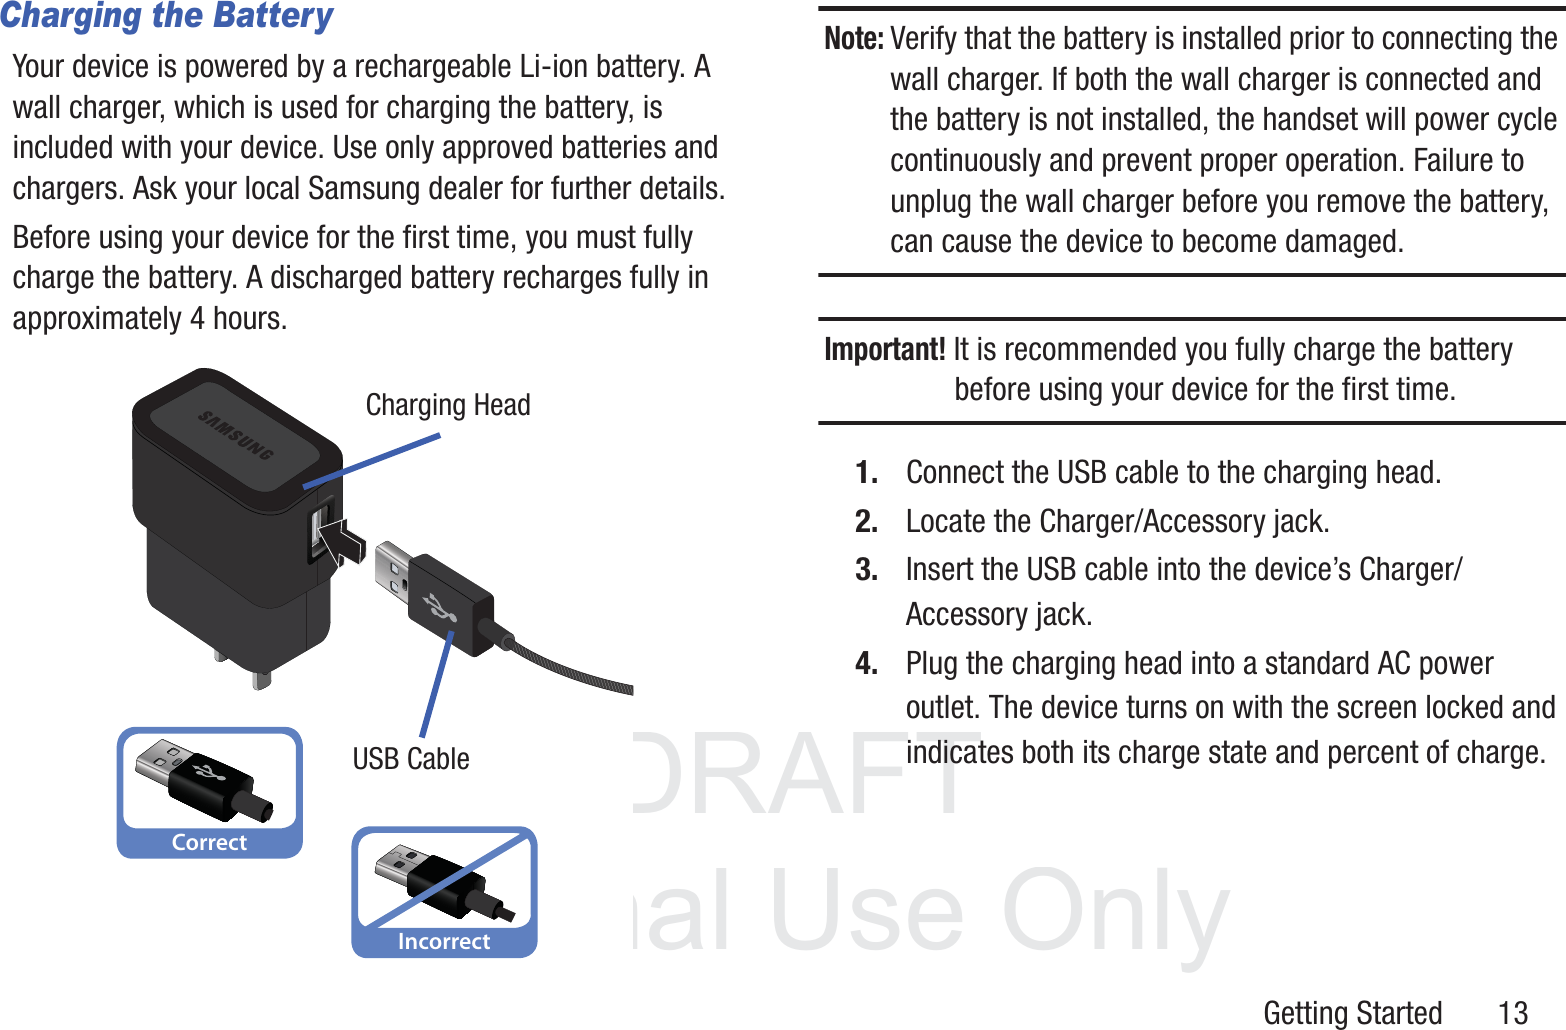 DRAFT InternalUse OnlyGetting Started       13Charging the BatteryYour device is powered by a rechargeable Li-ion battery. A wall charger, which is used for charging the battery, is included with your device. Use only approved batteries and chargers. Ask your local Samsung dealer for further details.Before using your device for the first time, you must fully charge the battery. A discharged battery recharges fully in approximately 4 hours.Note: Verify that the battery is installed prior to connecting the wall charger. If both the wall charger is connected and the battery is not installed, the handset will power cycle continuously and prevent proper operation. Failure to unplug the wall charger before you remove the battery, can cause the device to become damaged.Important! It is recommended you fully charge the battery before using your device for the first time.1. Connect the USB cable to the charging head.2. Locate the Charger/Accessory jack.3. Insert the USB cable into the device’s Charger/Accessory jack.4. Plug the charging head into a standard AC power outlet. The device turns on with the screen locked and indicates both its charge state and percent of charge.CorrectIncorrectCharging HeadUSB Cable